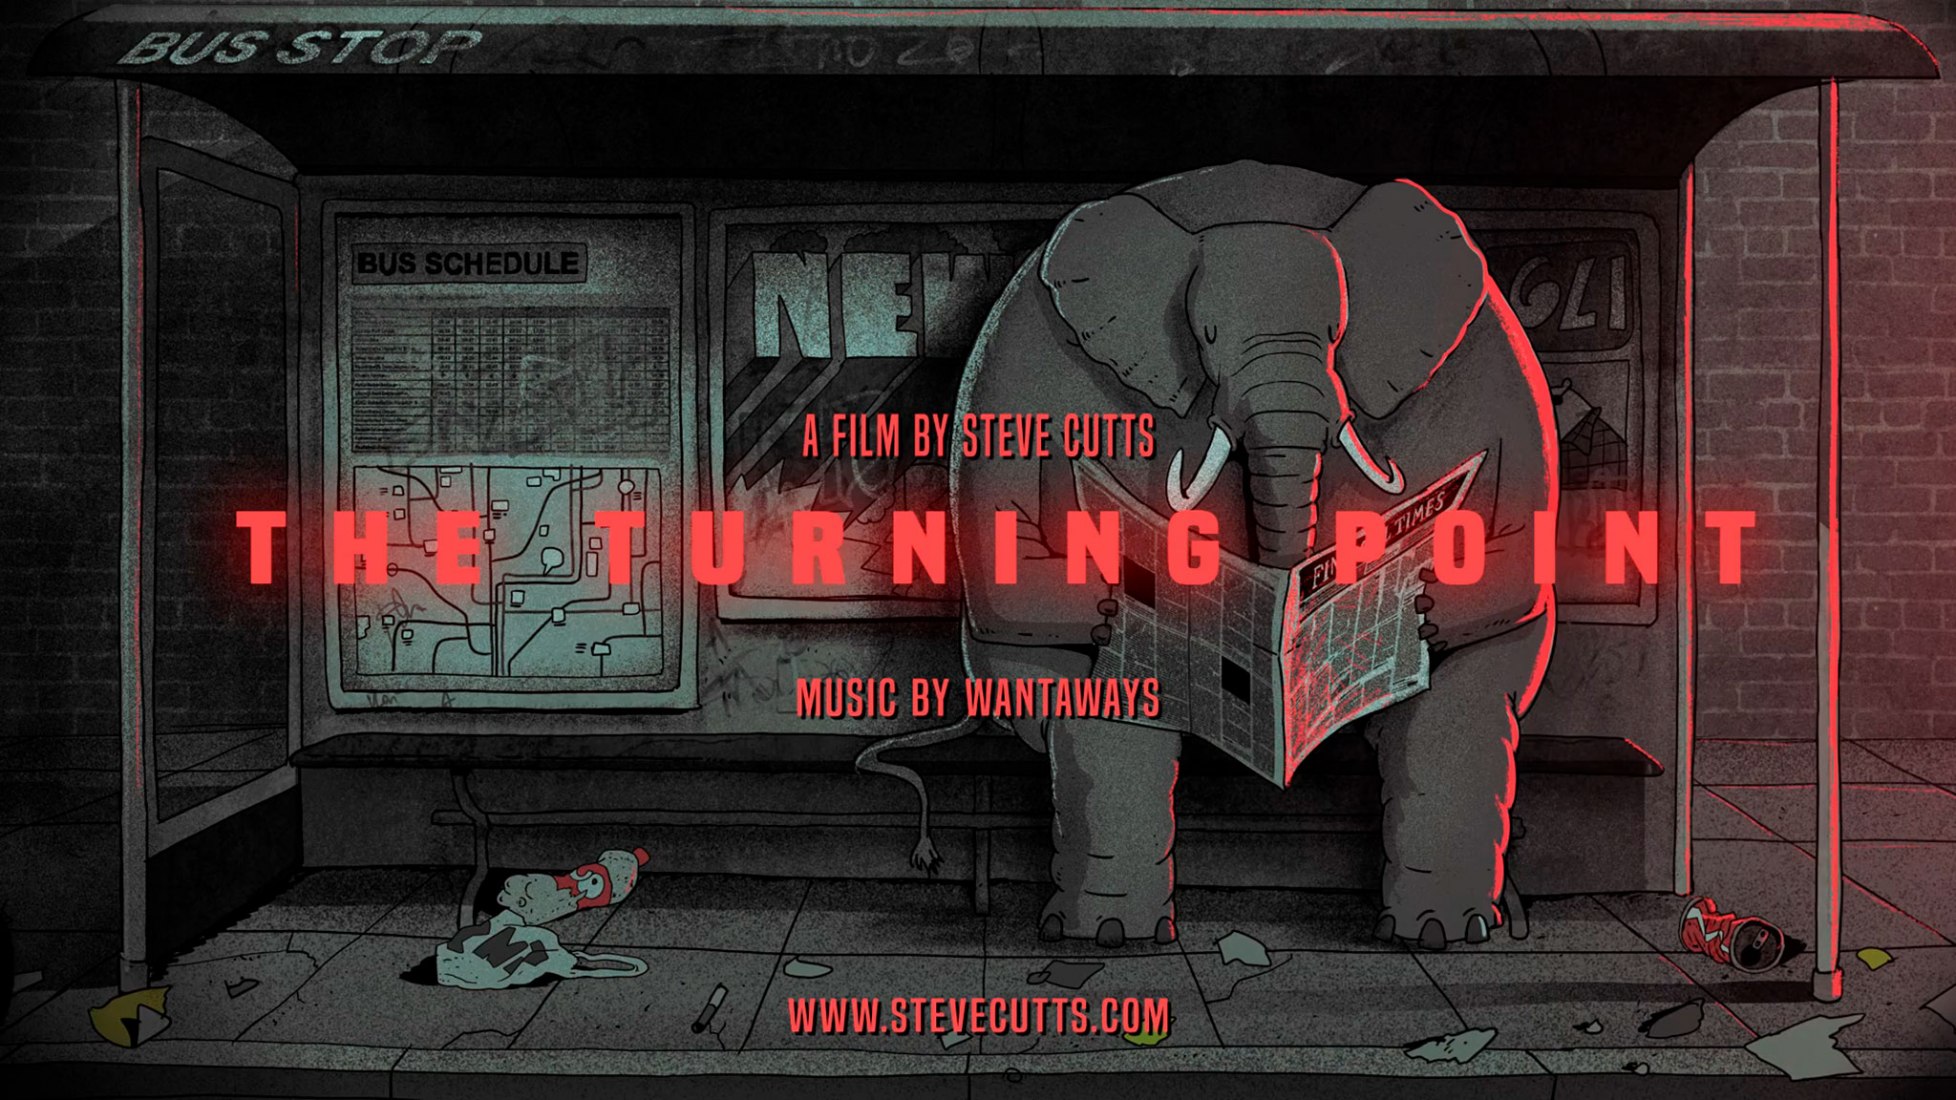 'The Turning Point' - Steve Cutts Let's Mankind Perish Through An Animal Society1956 x 1100